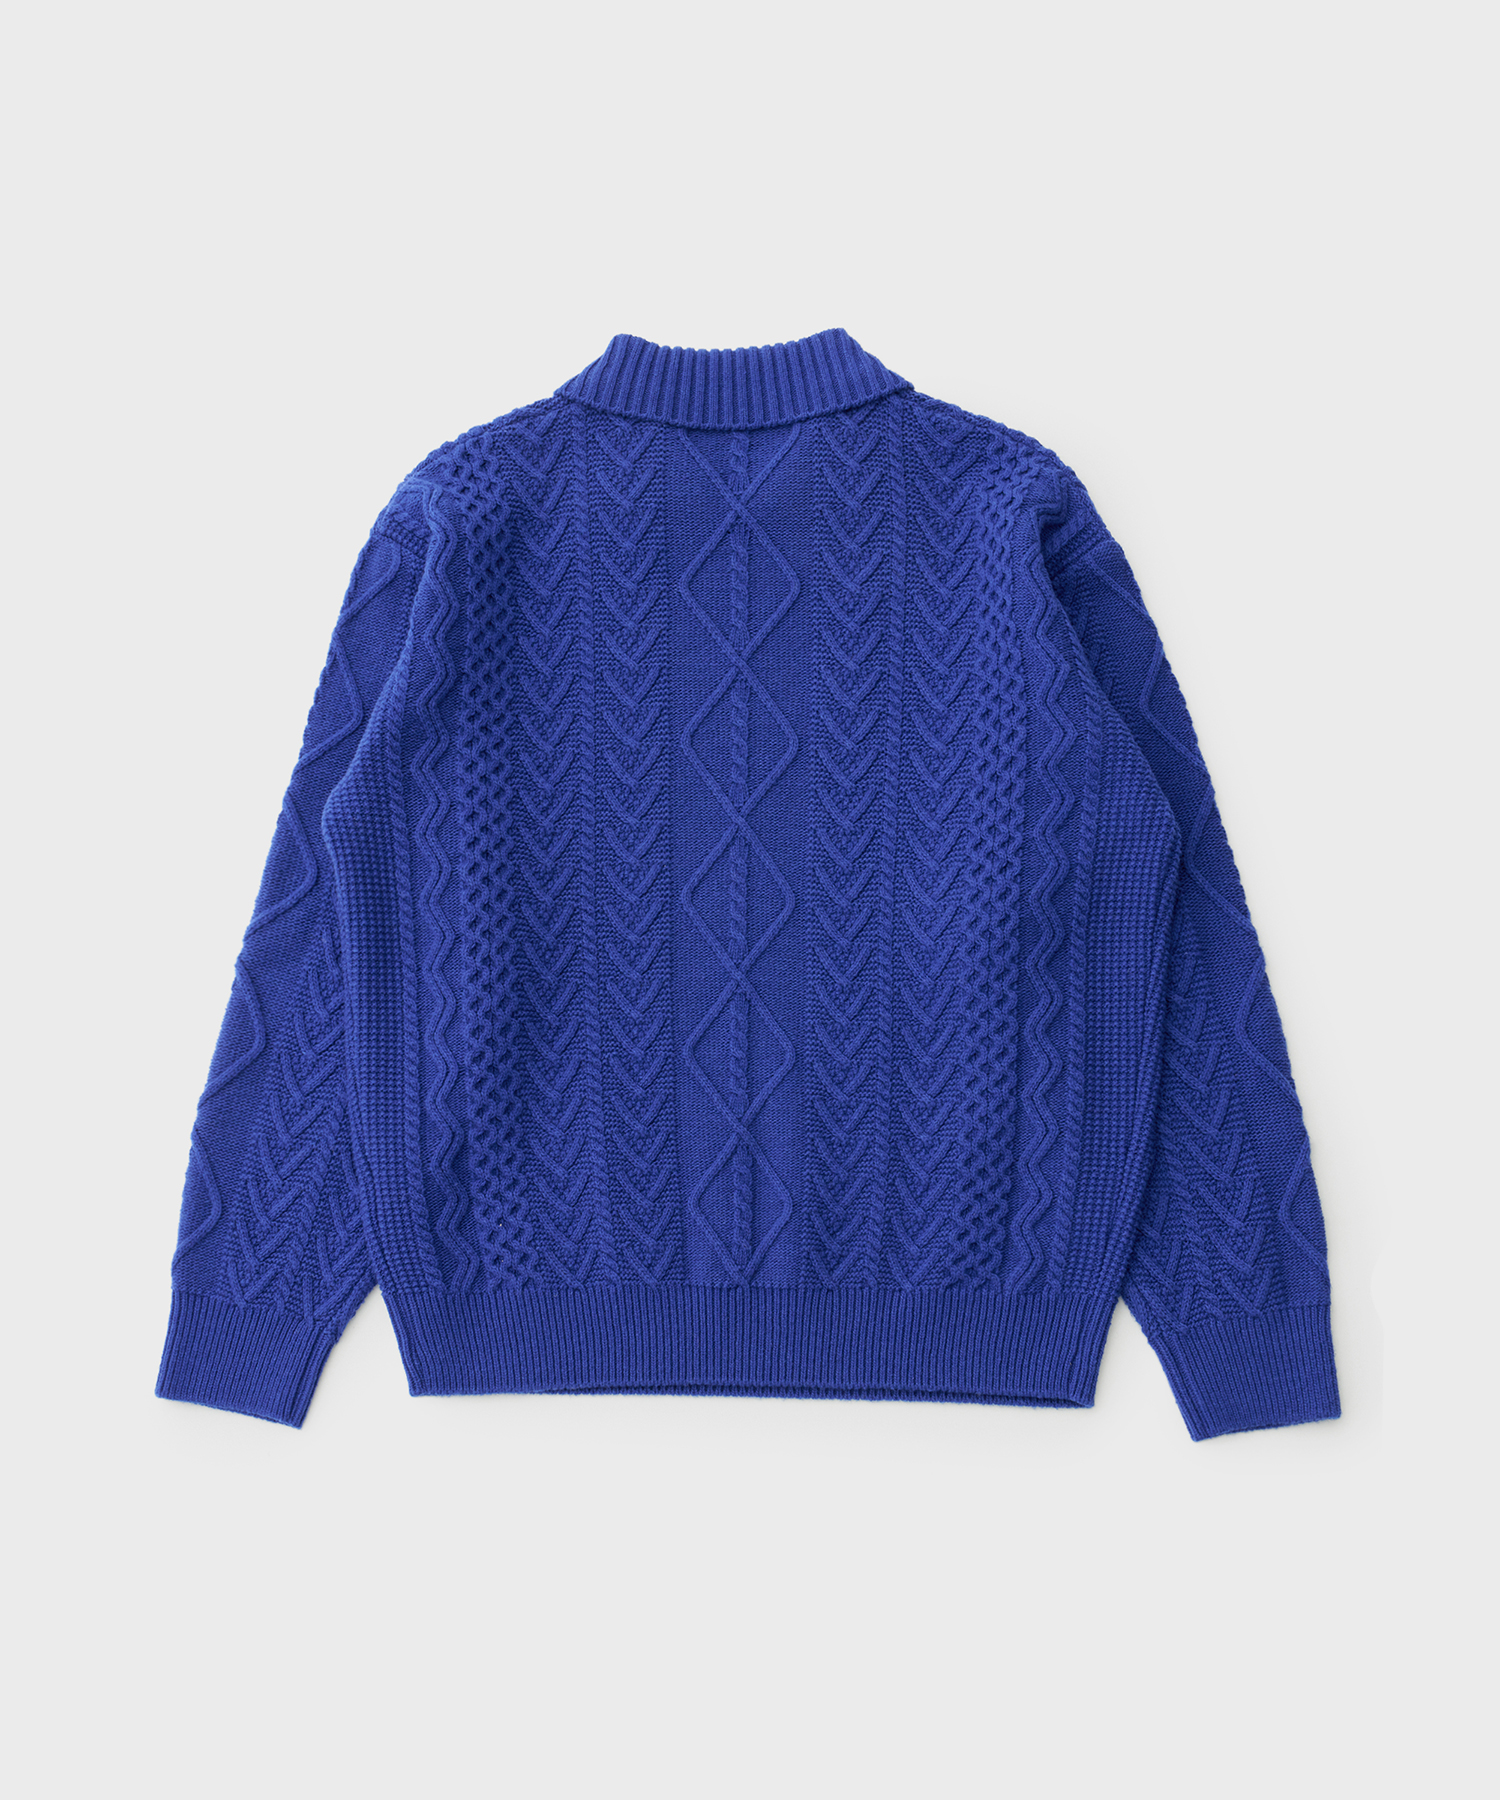 23AW Fisherman Cable Knit (Cobalt)